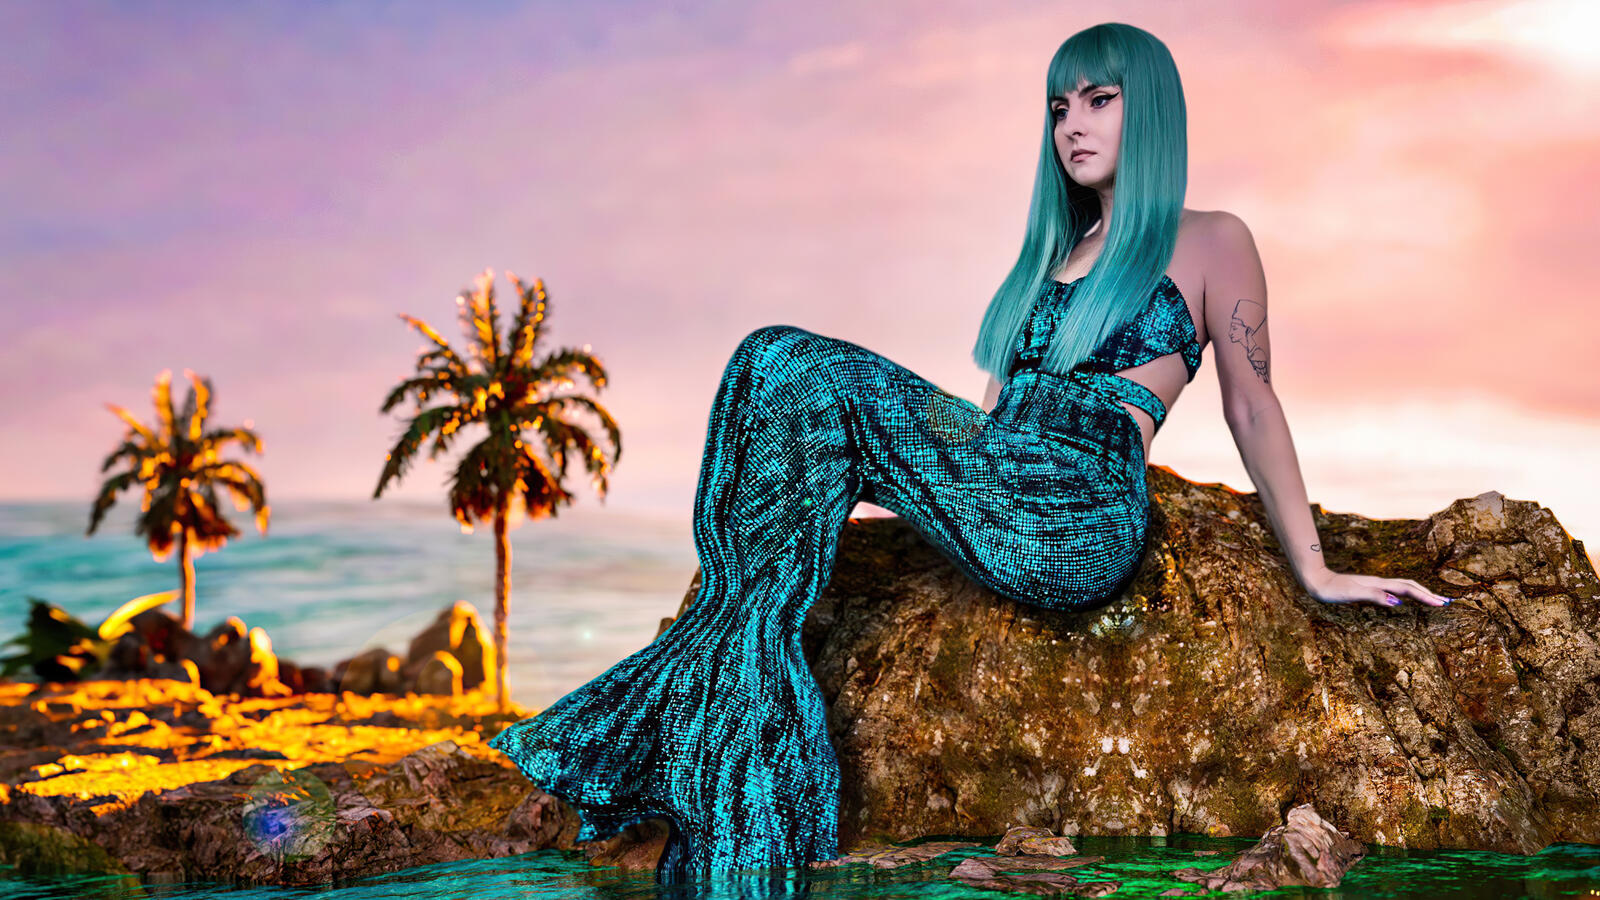 Free photo A mermaid girl with blue hair sits on a rock